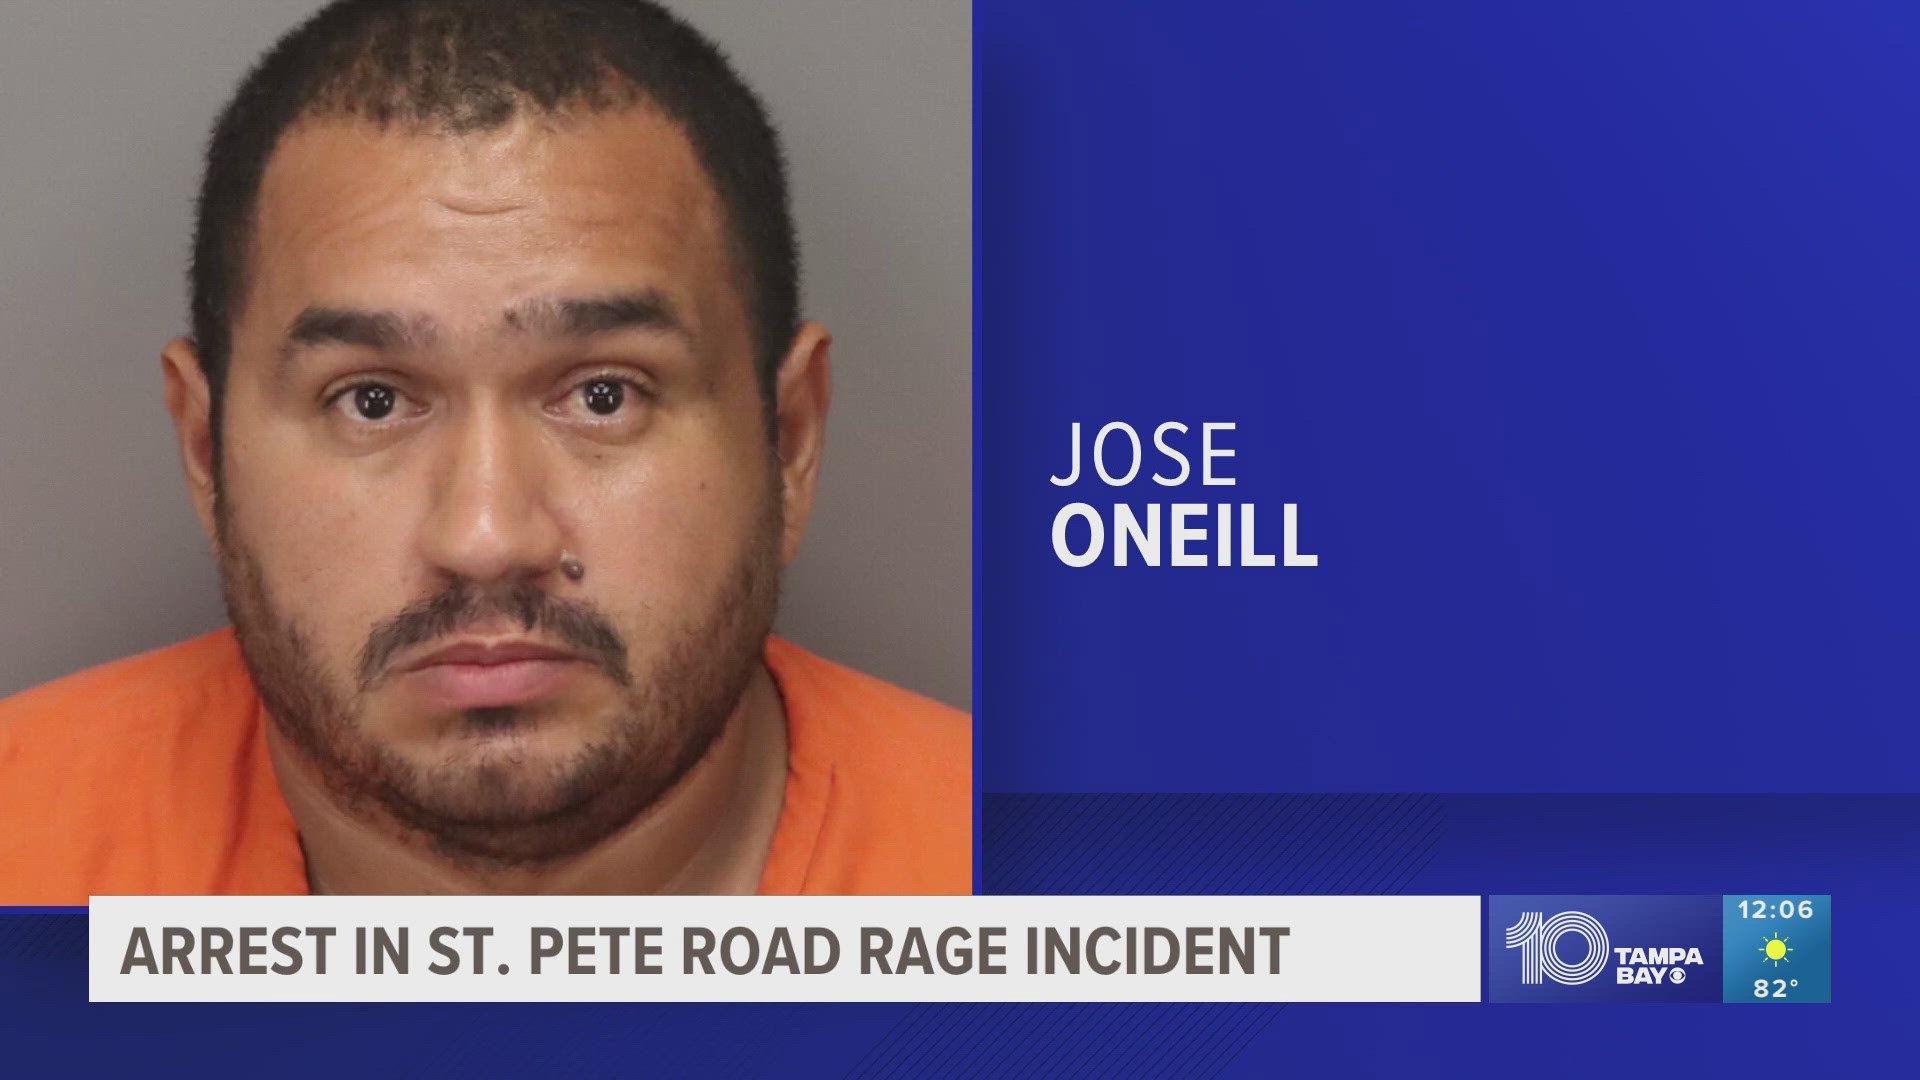 Thirty-four-year-old Jose Oneill was arrested hours after stabbing another man during a fight near Sexton Elementary School Tuesday afternoon.